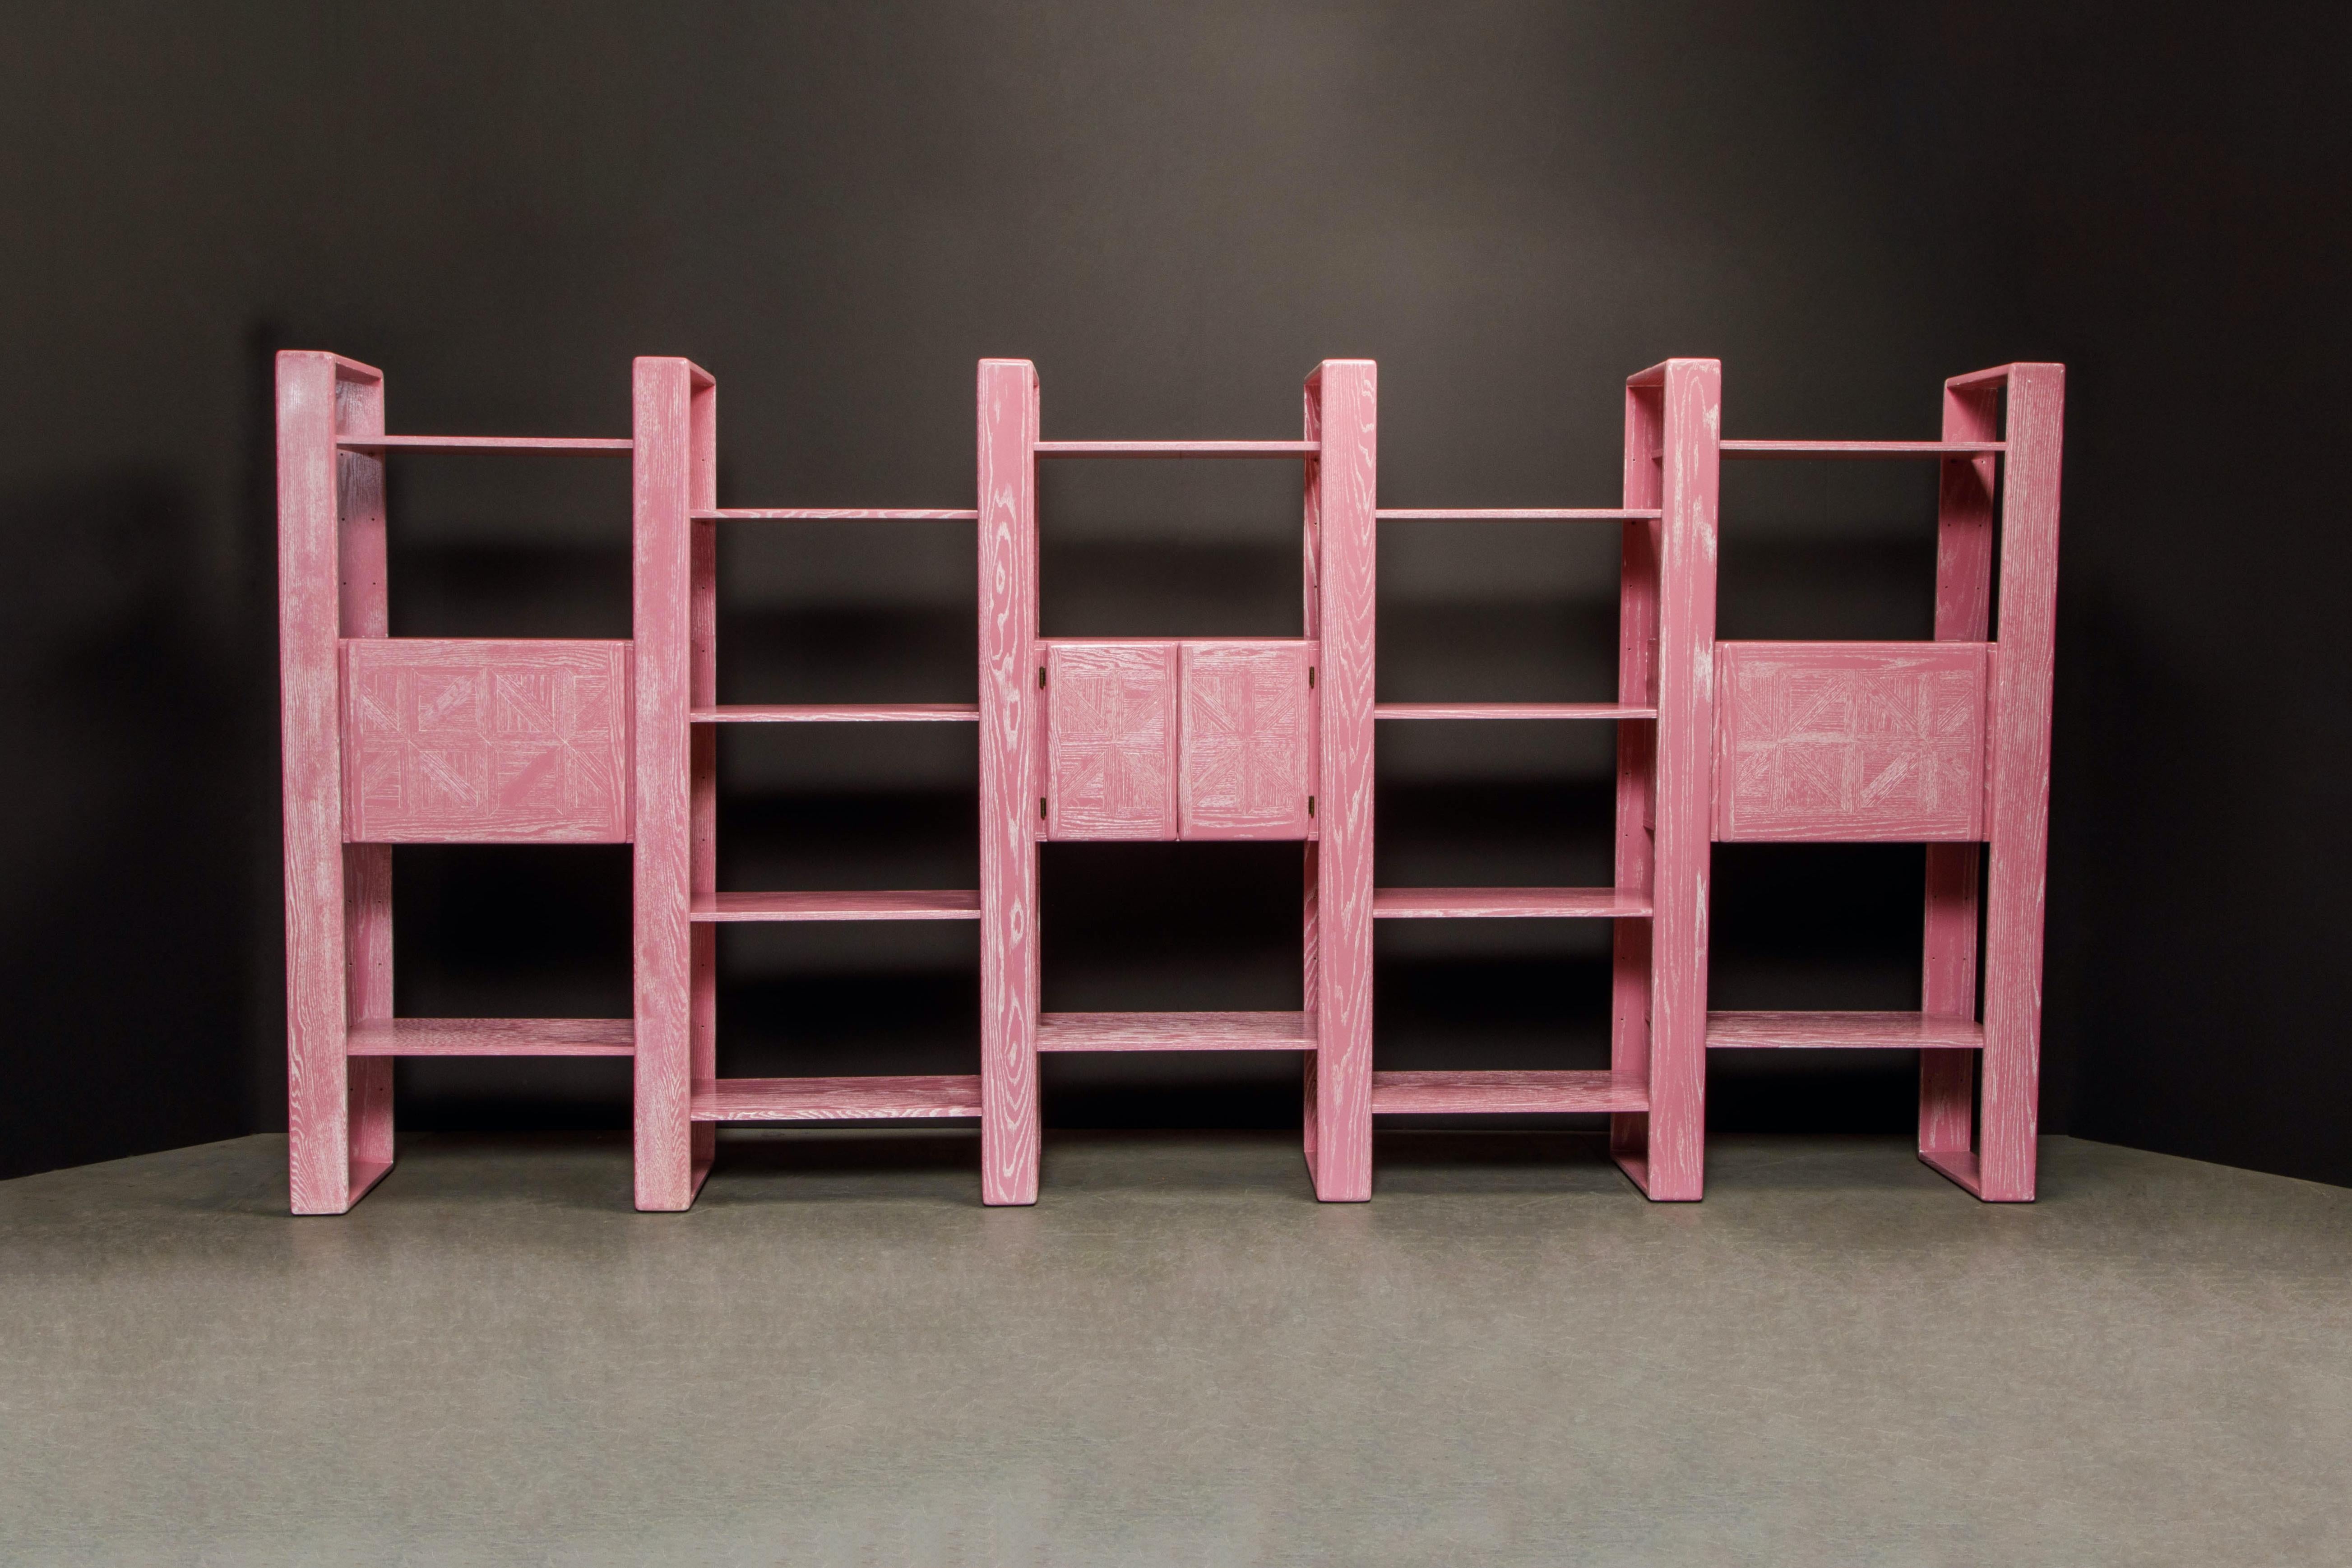 This absolute show-stopper modular bookcase refinished in gorgeous pink cerused oak is by Lou Hodges, designed and produced in California in the 1970s. You can configure this modular set in so many ways, also we have additional sections and shelves